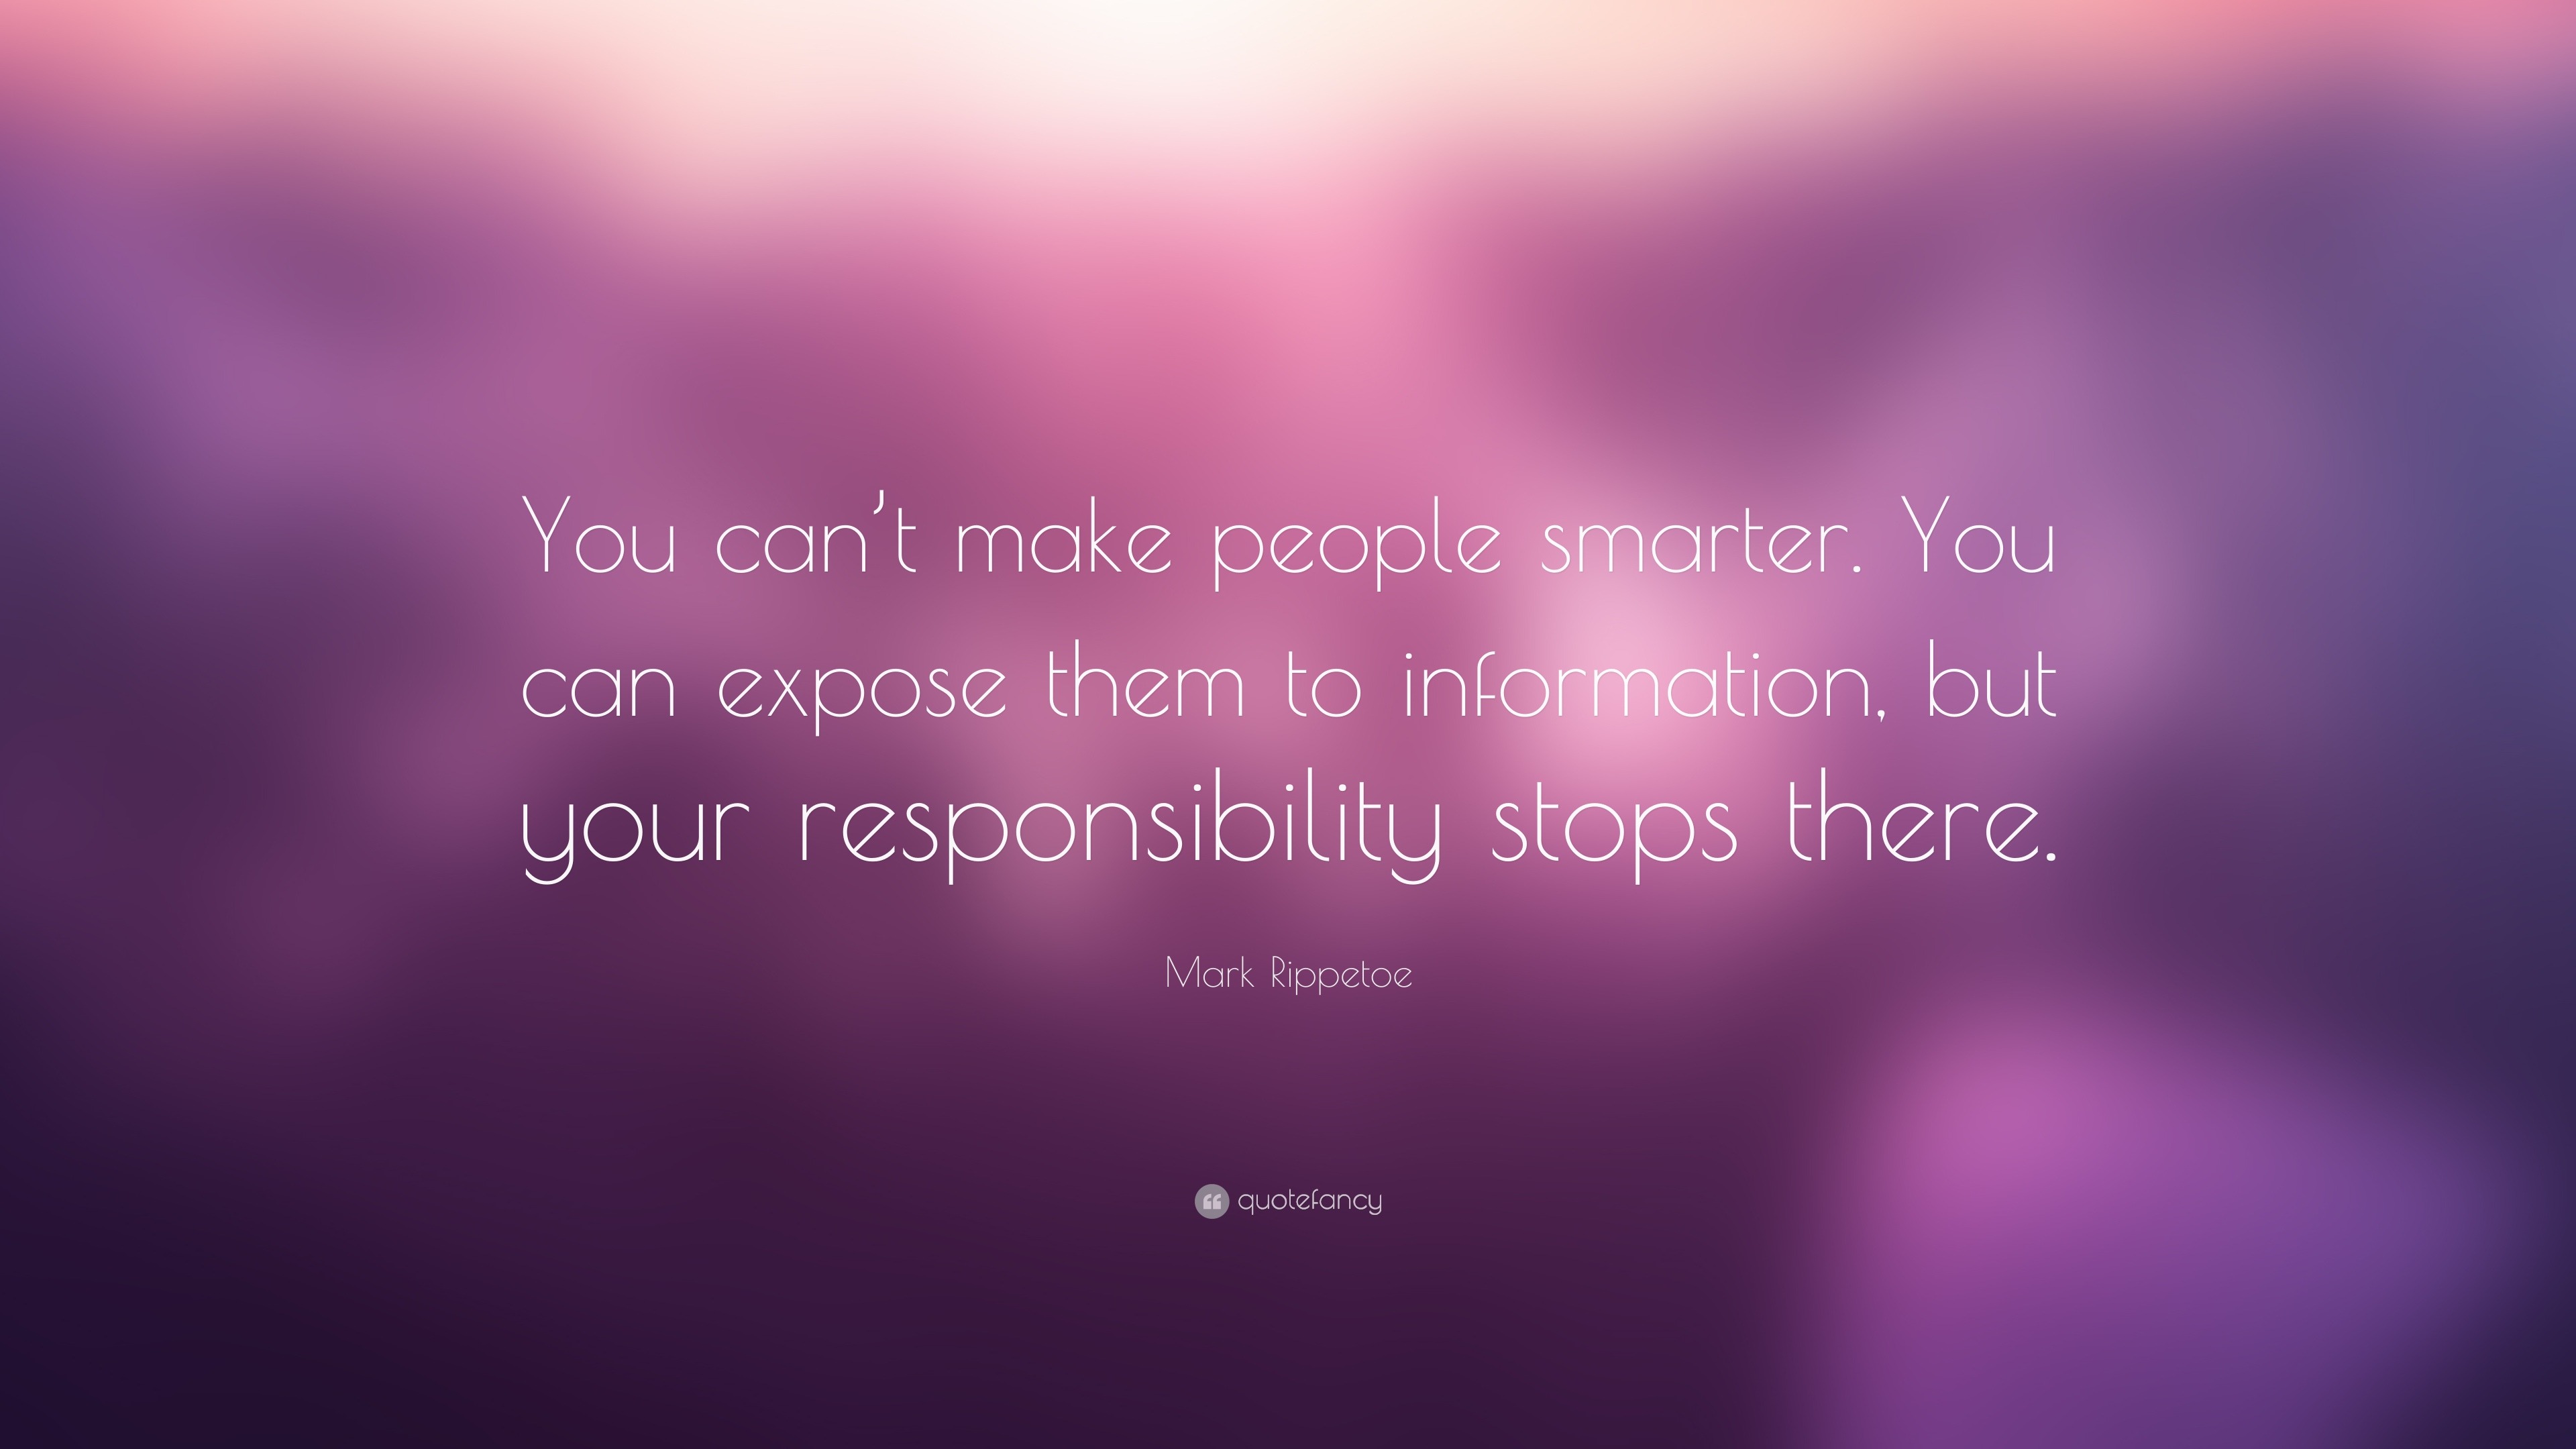 Mark Rippetoe Quote: “You can’t make people smarter. You can expose ...